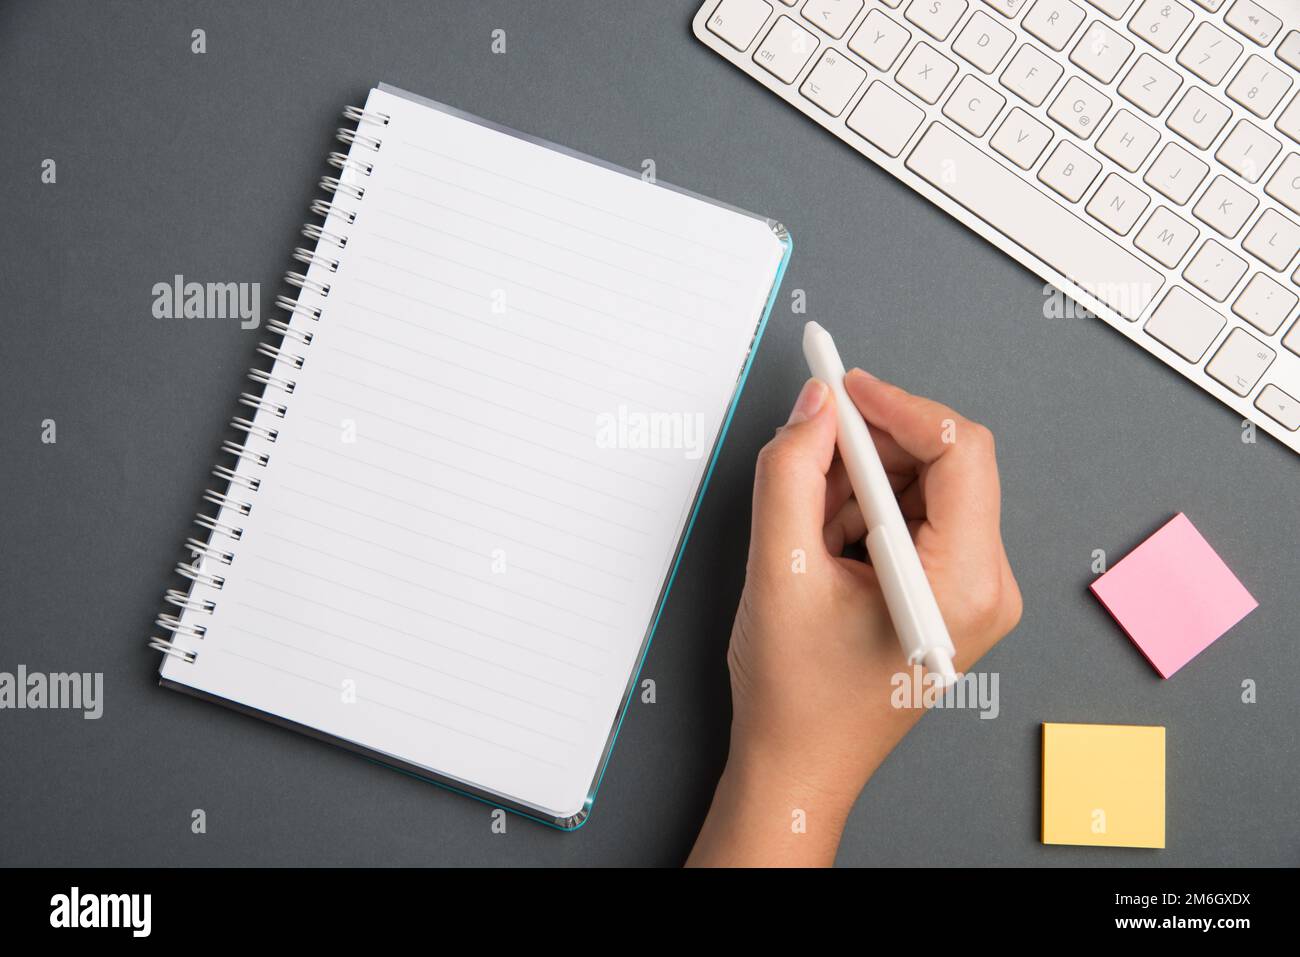 Keyboard Over A Table Beside A Notebook And Pens With Sticky Notes. Computer Keypad On Top Of A Desk With A Office Supplies And Stock Photo